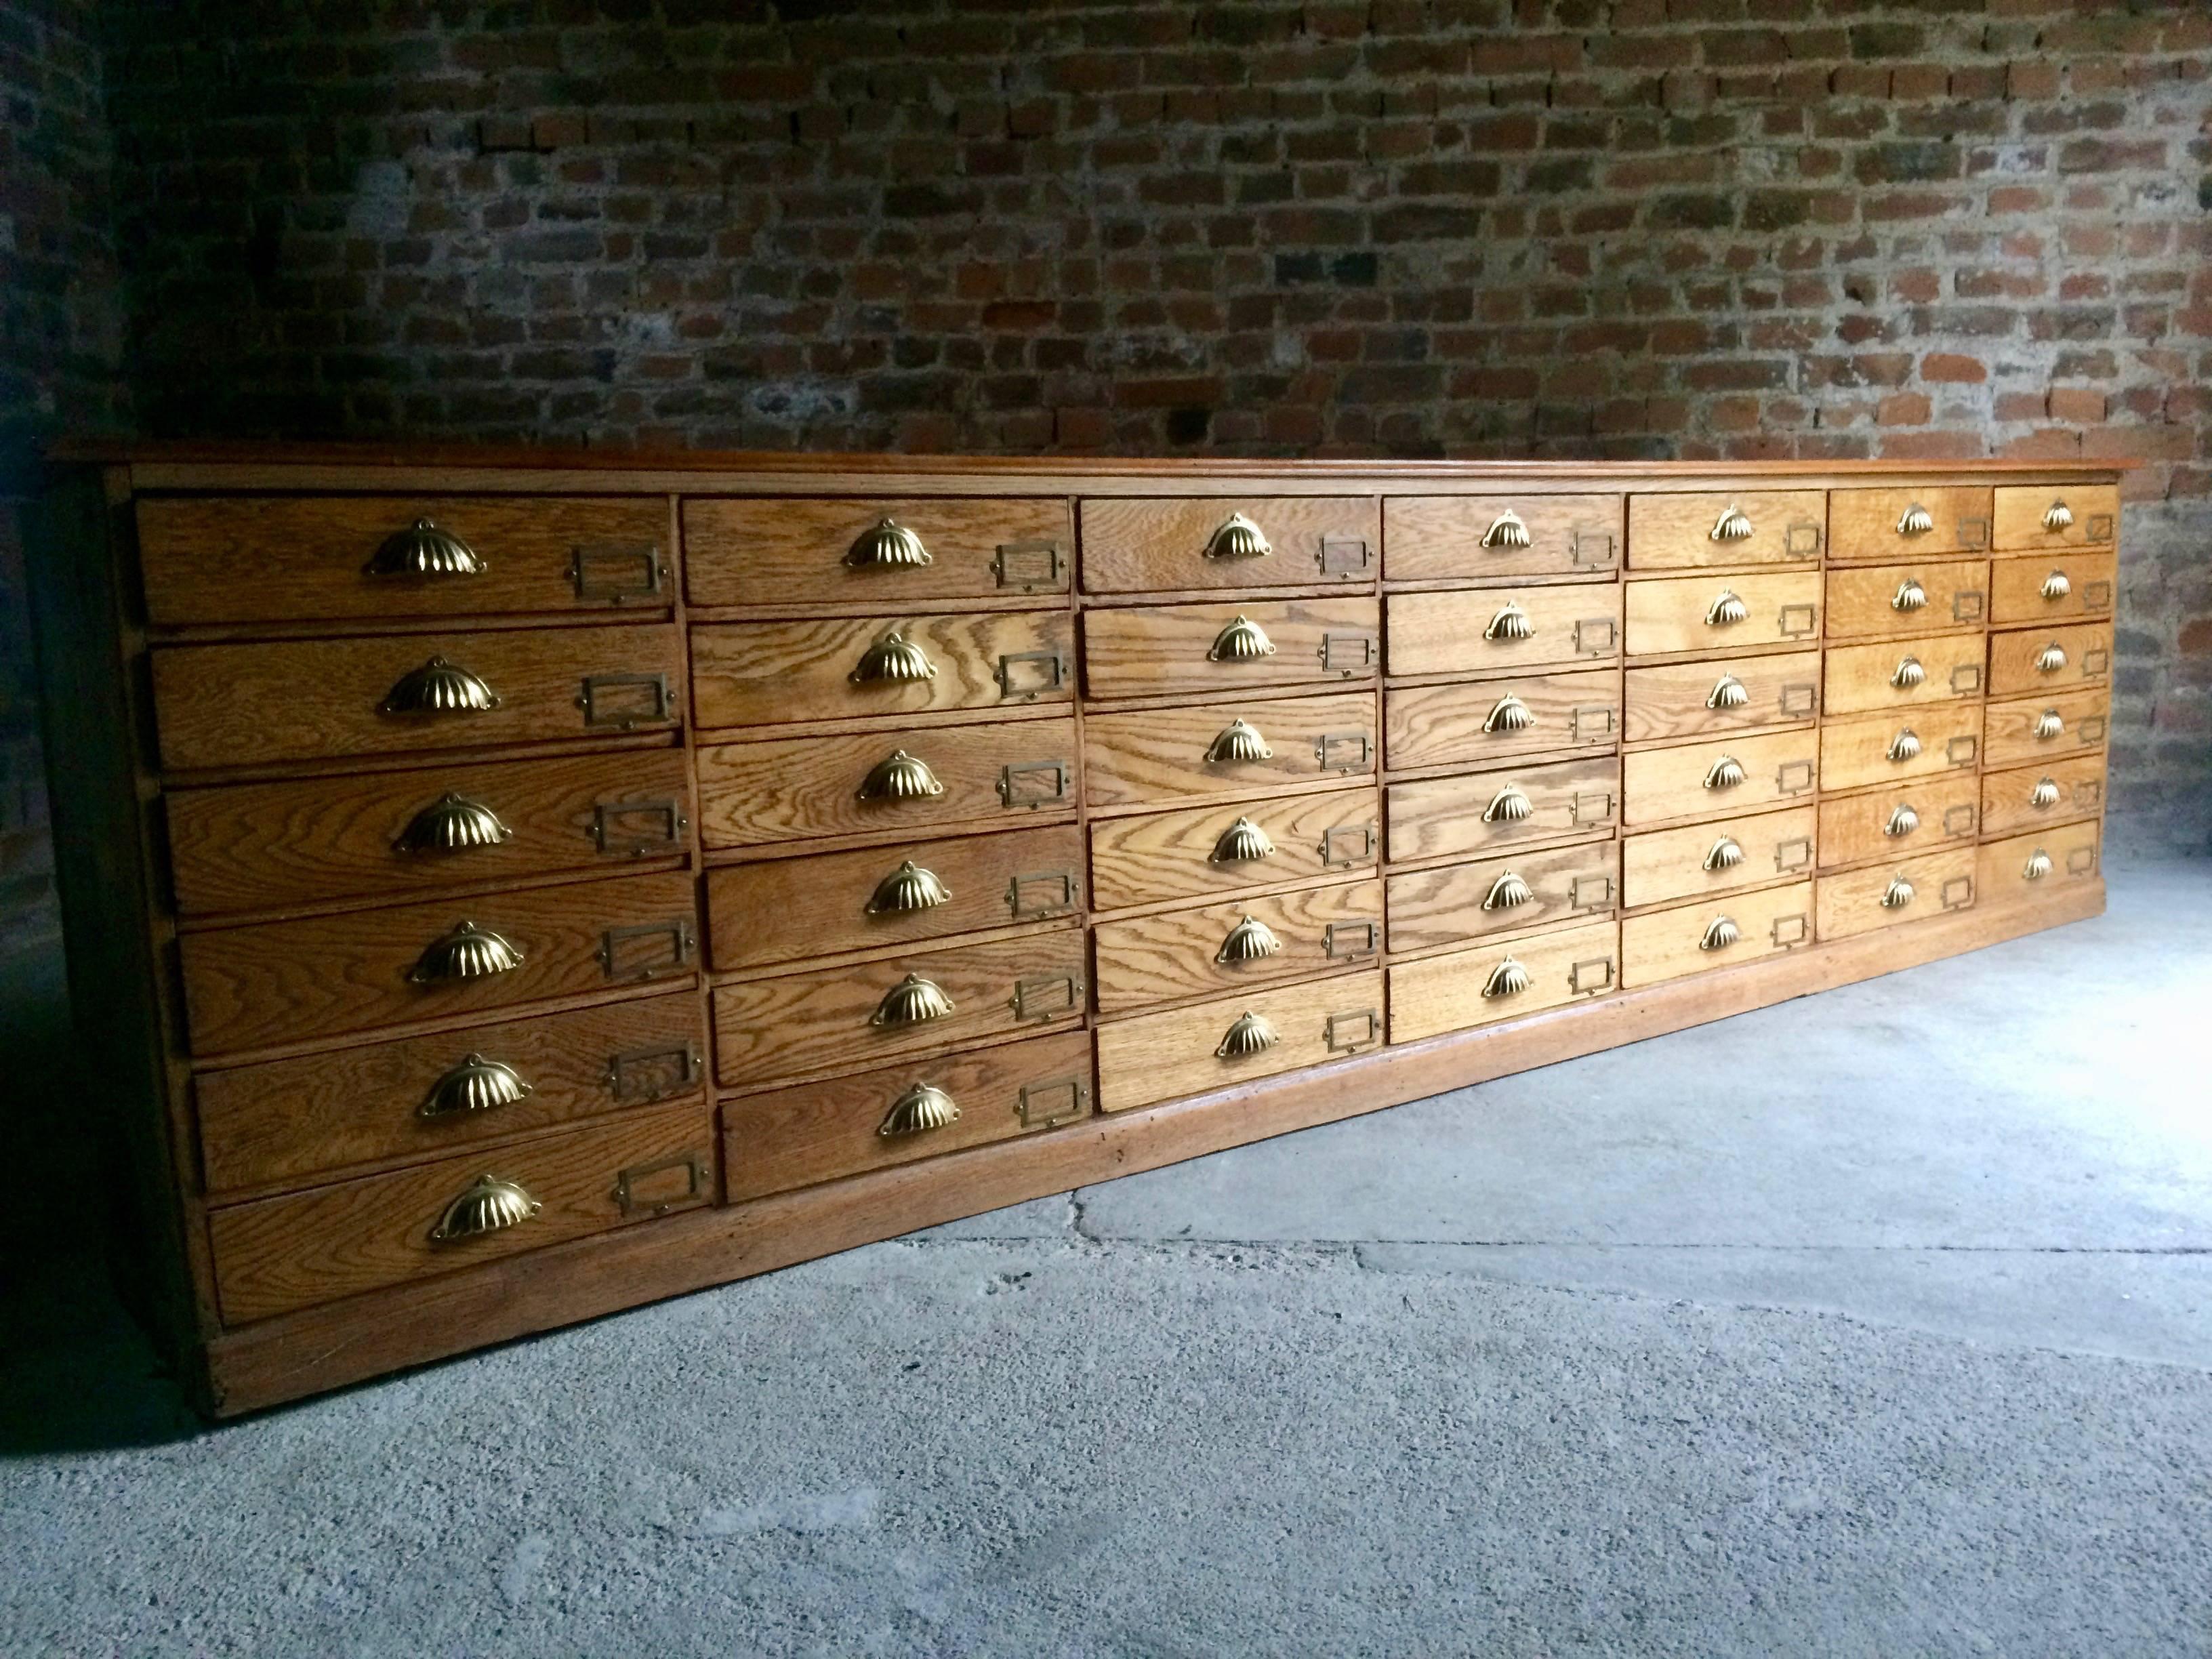 Magnificent antique 19th century Haberdashery Golden oak shop counter chest of 42 drawers circa 1875 from the Victorian era, the rectangular lift off counter top over forty two pull-out drawers all with brass shell cup handles and brass index card